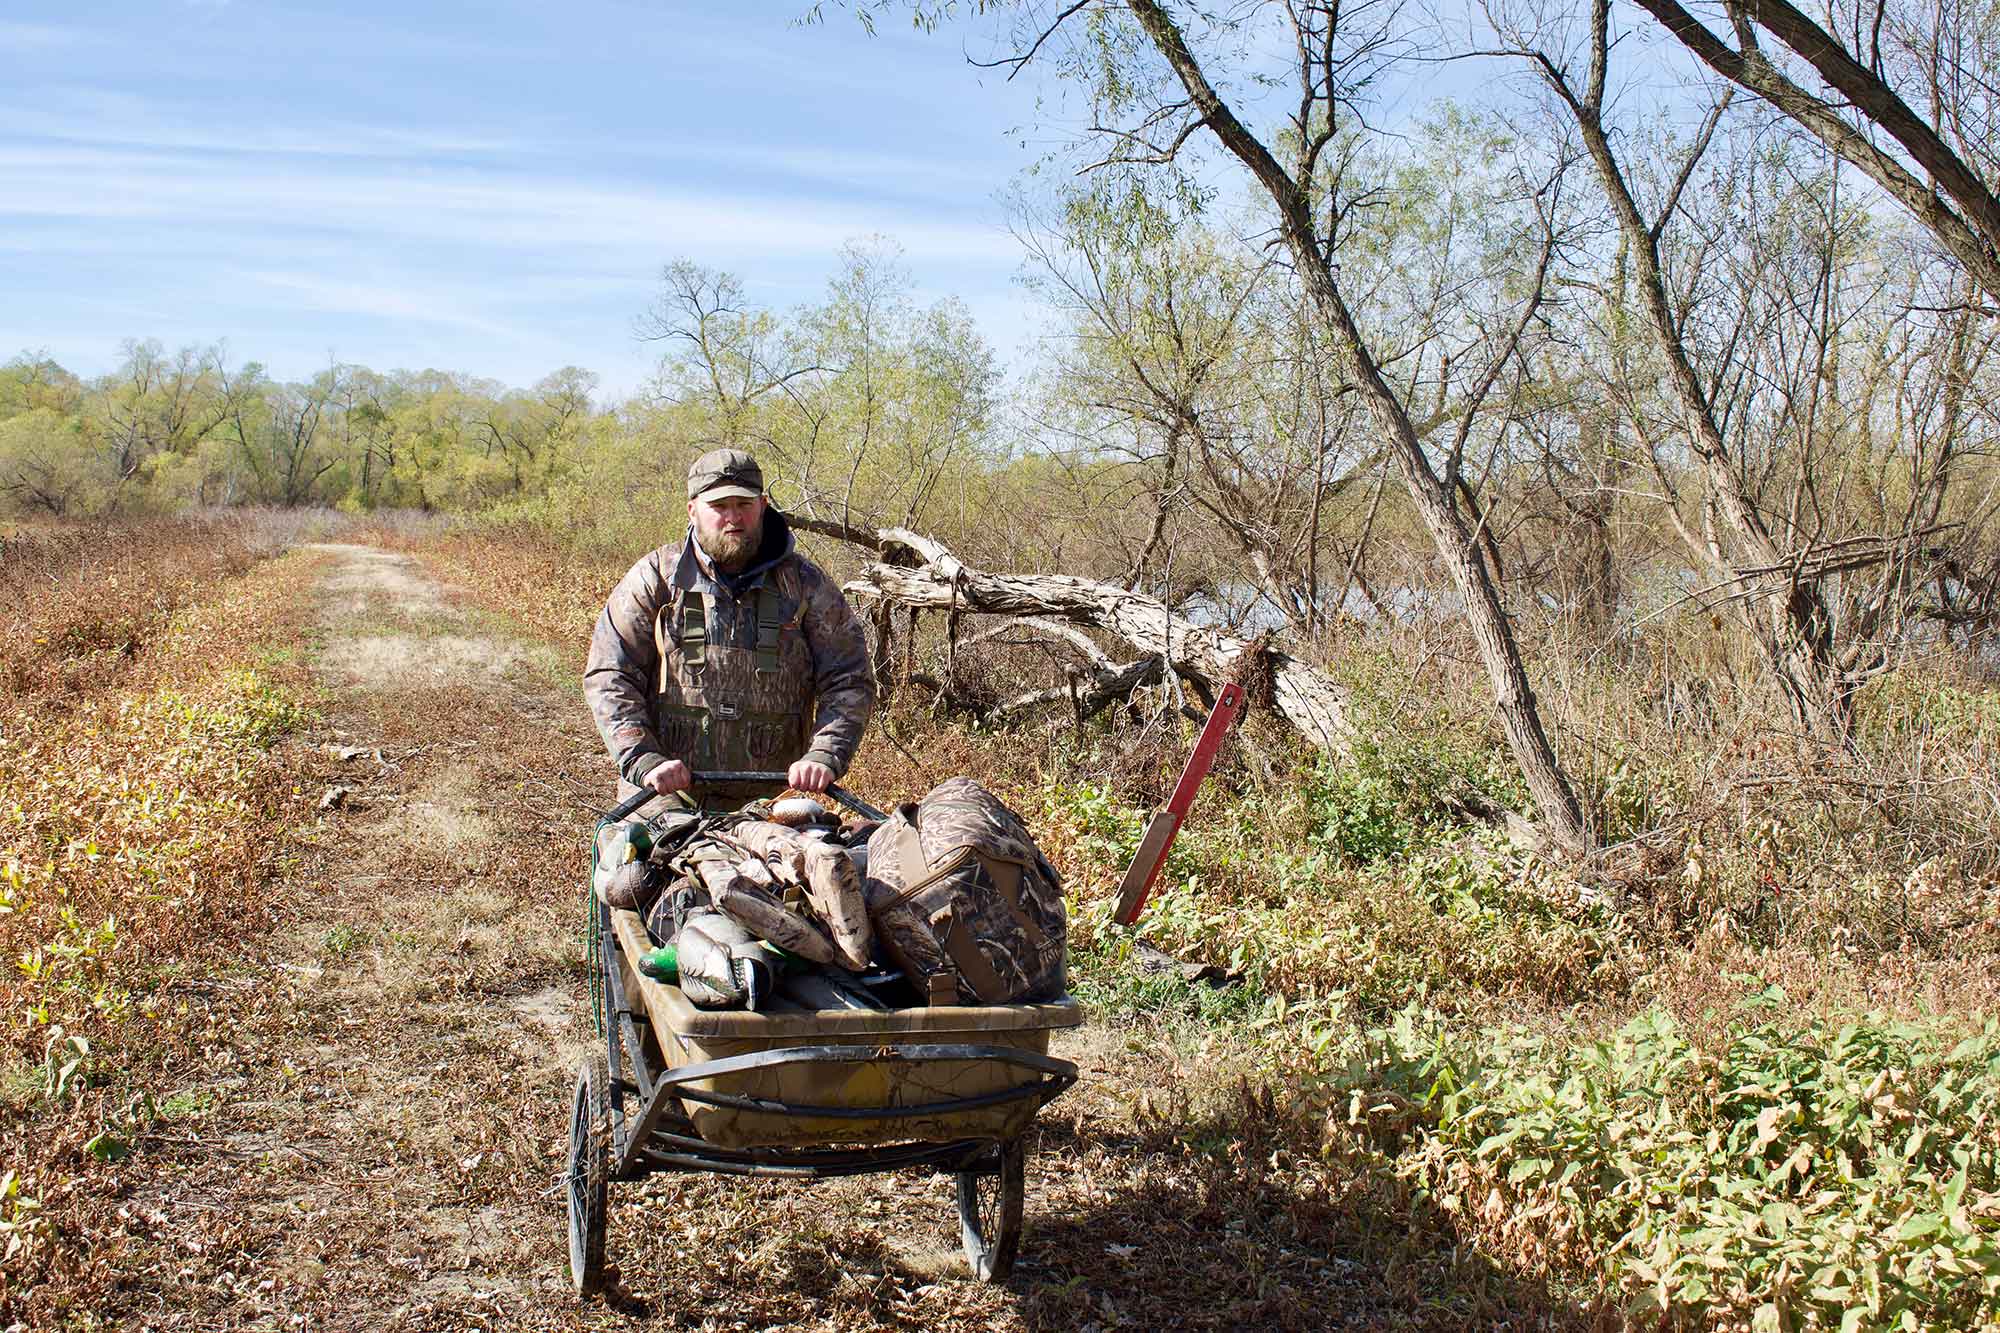 A cart is invaluable for walk-in duck hunting